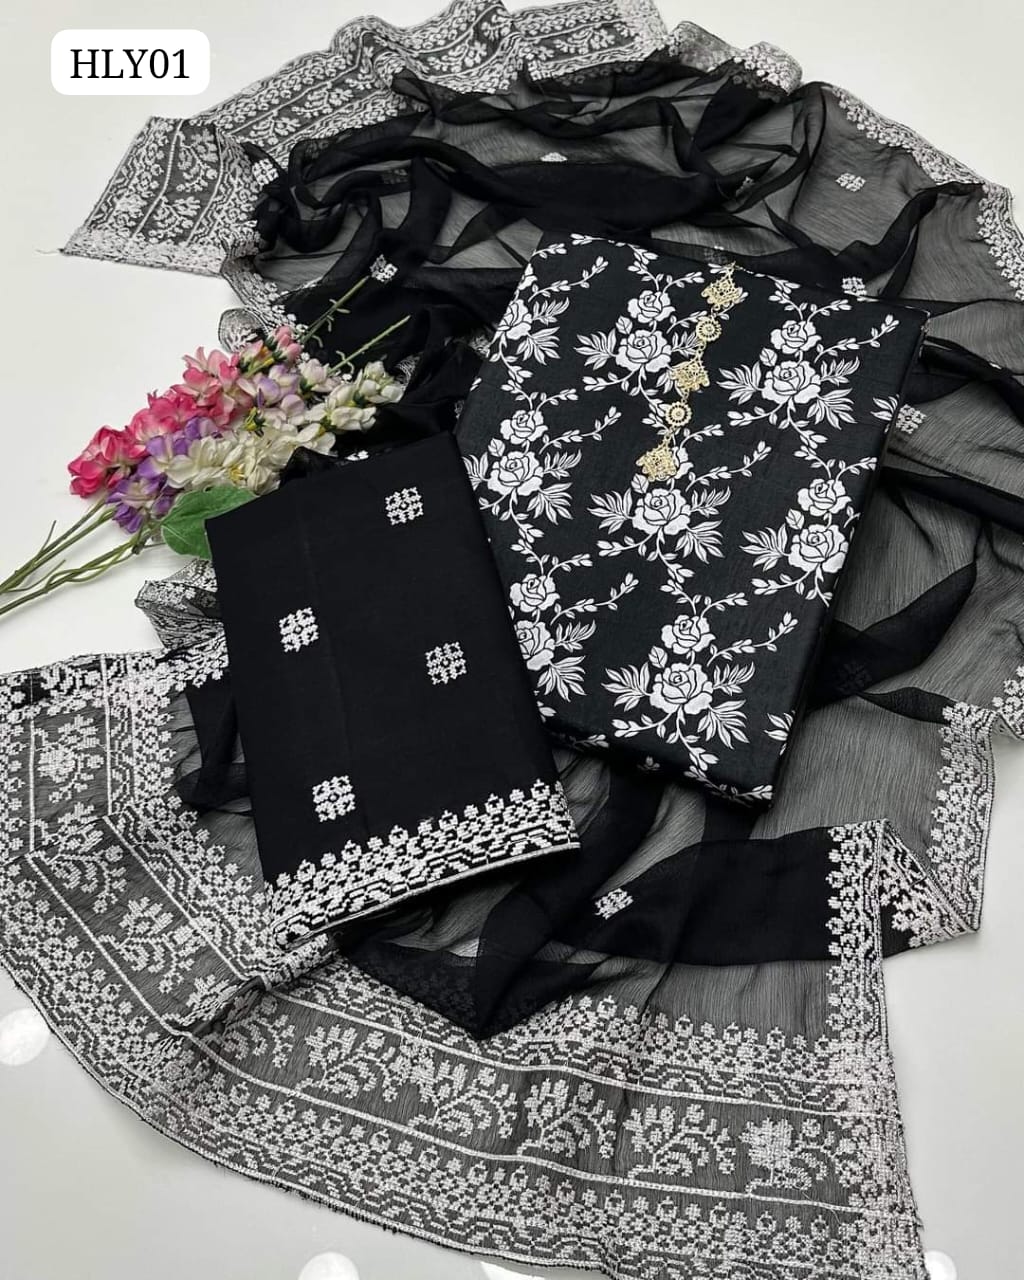 ﻿Lawn Fabric Floral Print Black And White Shirt And Cross Stitch Embroidery Lawn Trouser Along With Chiffon Cross Stitch Embroidery Duppata 3 Pc Dress